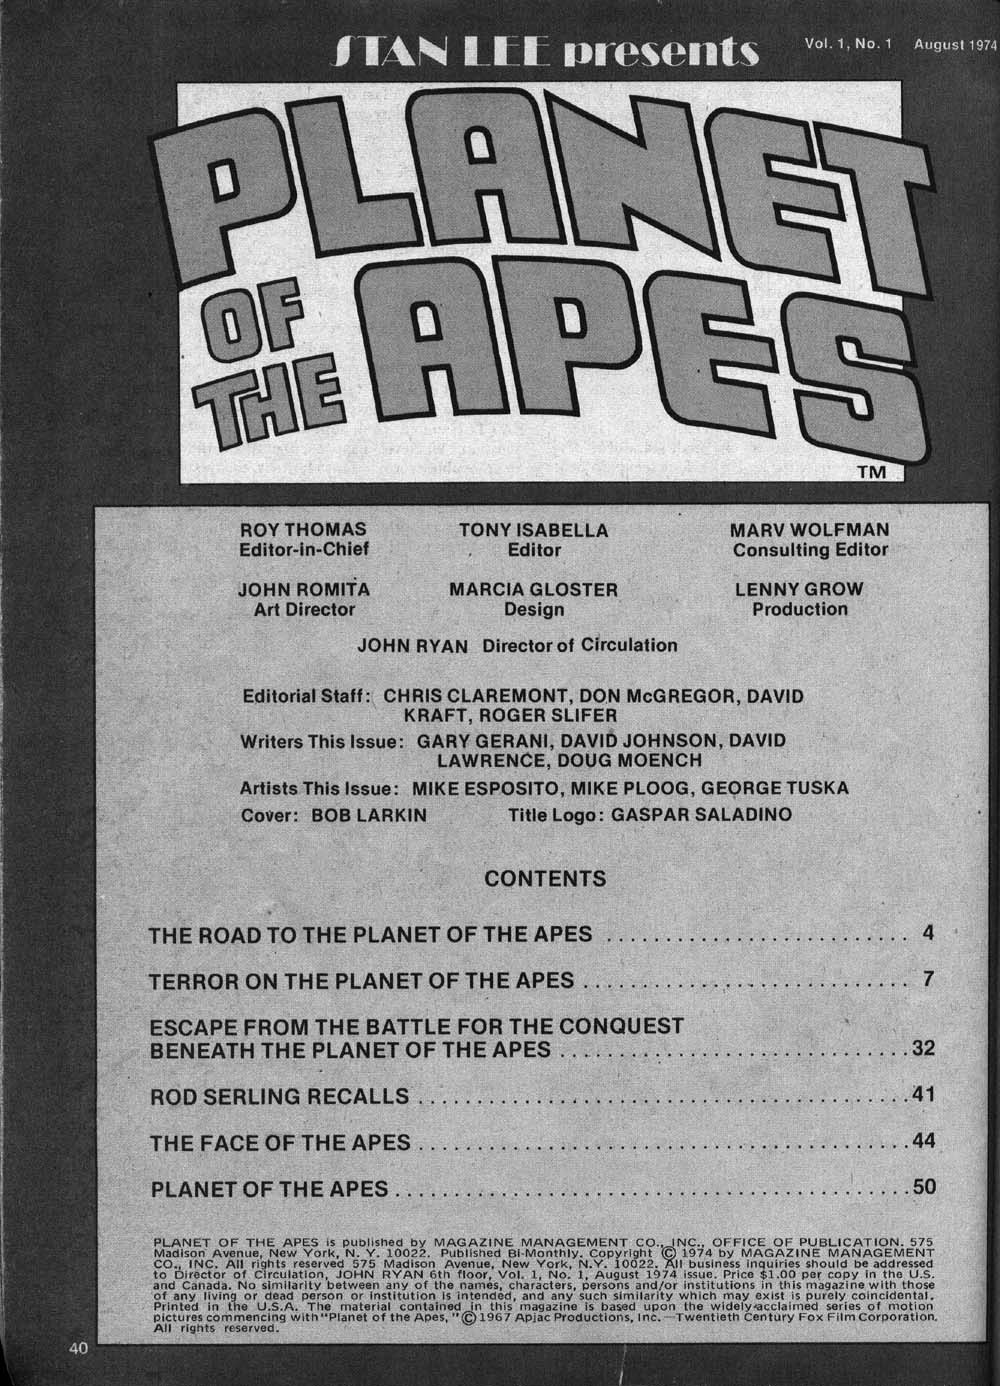 Read online Planet of the Apes comic -  Issue #1 - 40